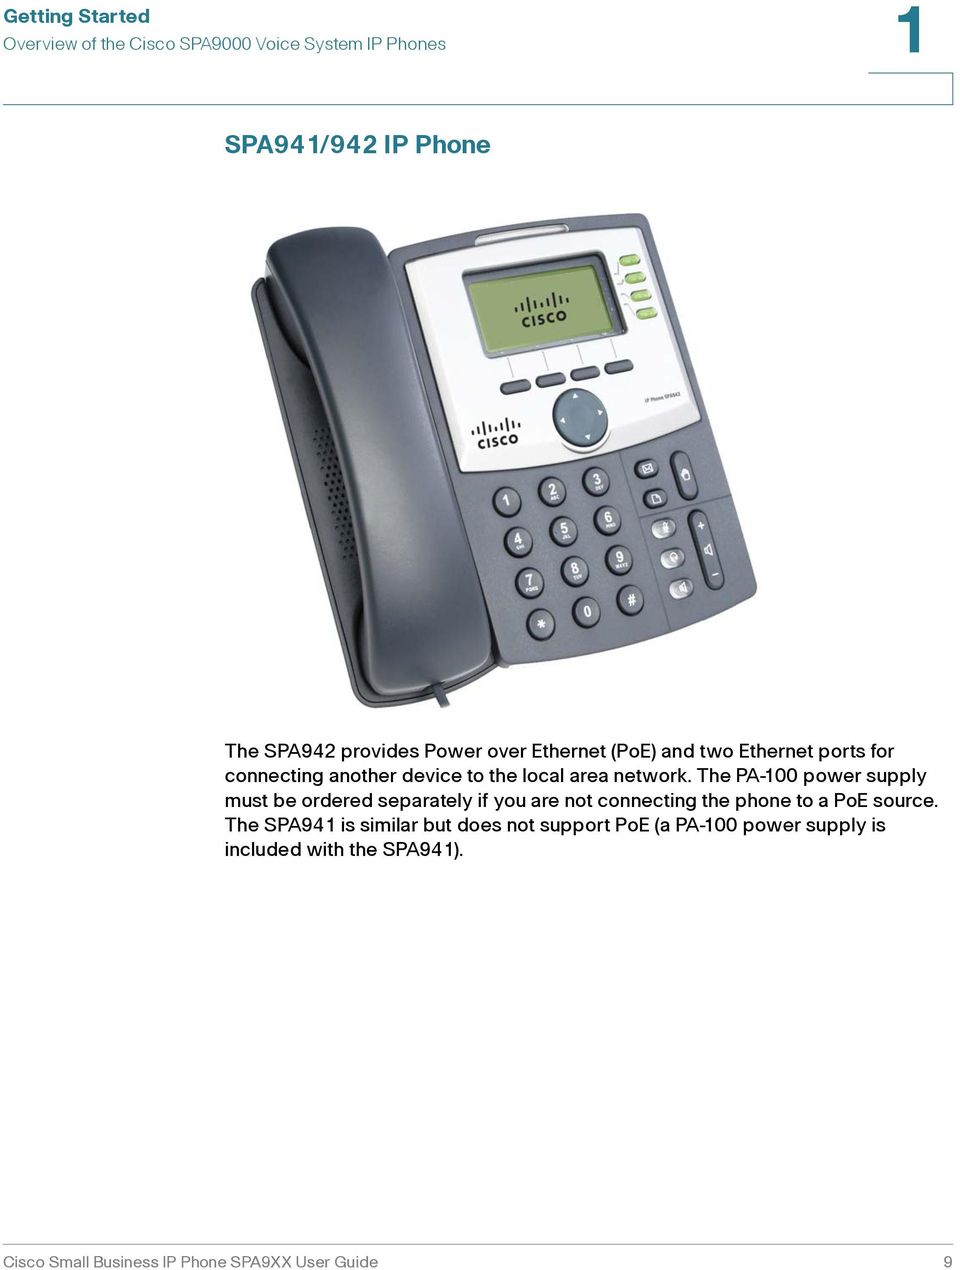 The PA-100 power supply must be ordered separately if you are not connecting the phone to a PoE source.